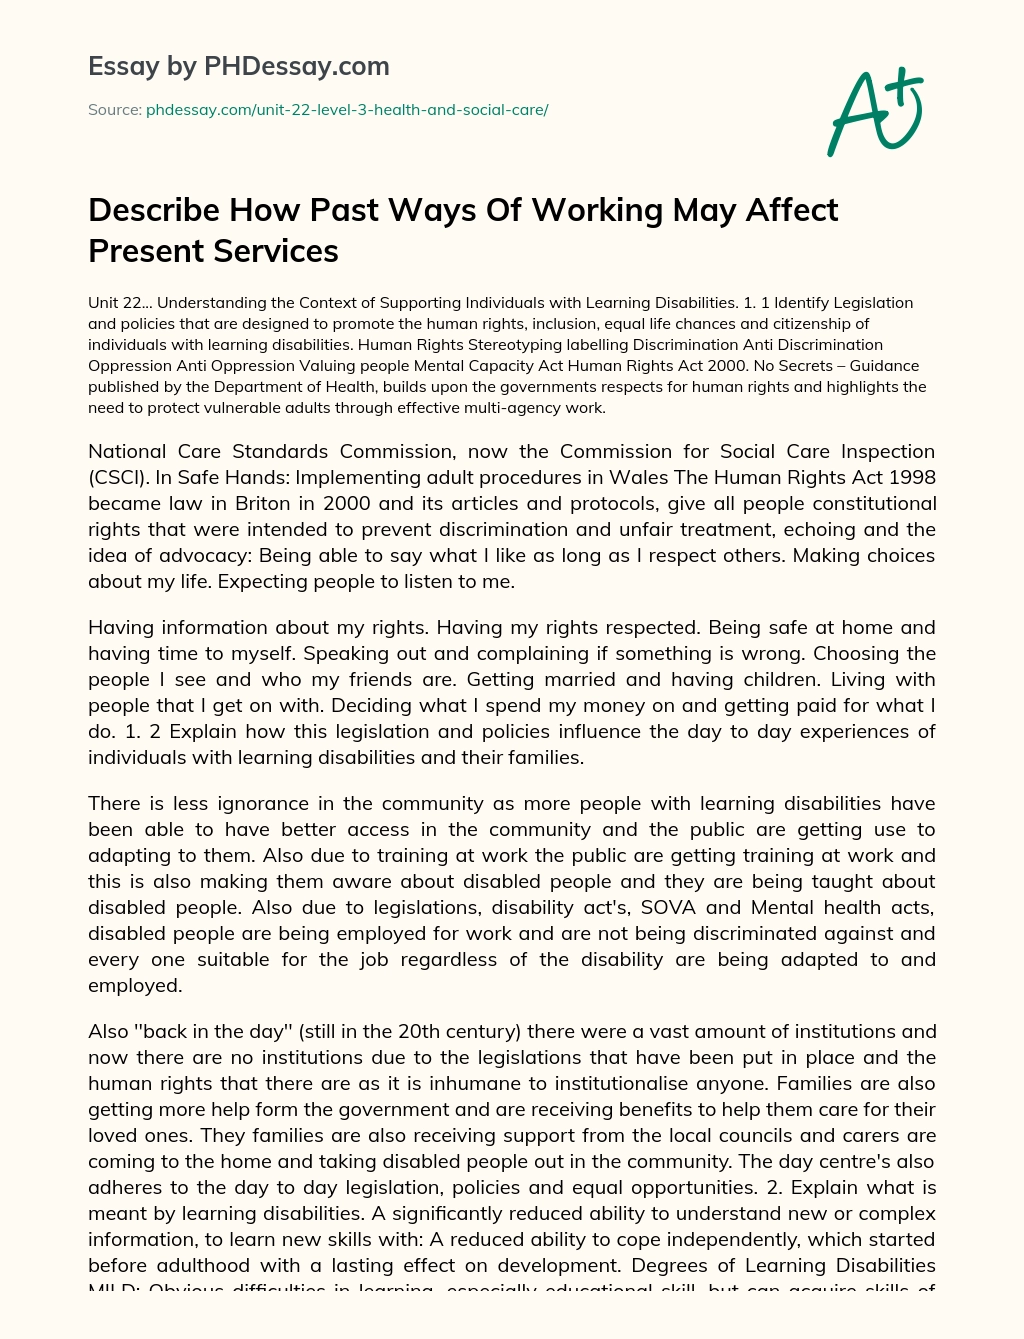 Describe How Past Ways Of Working May Affect Present Services essay